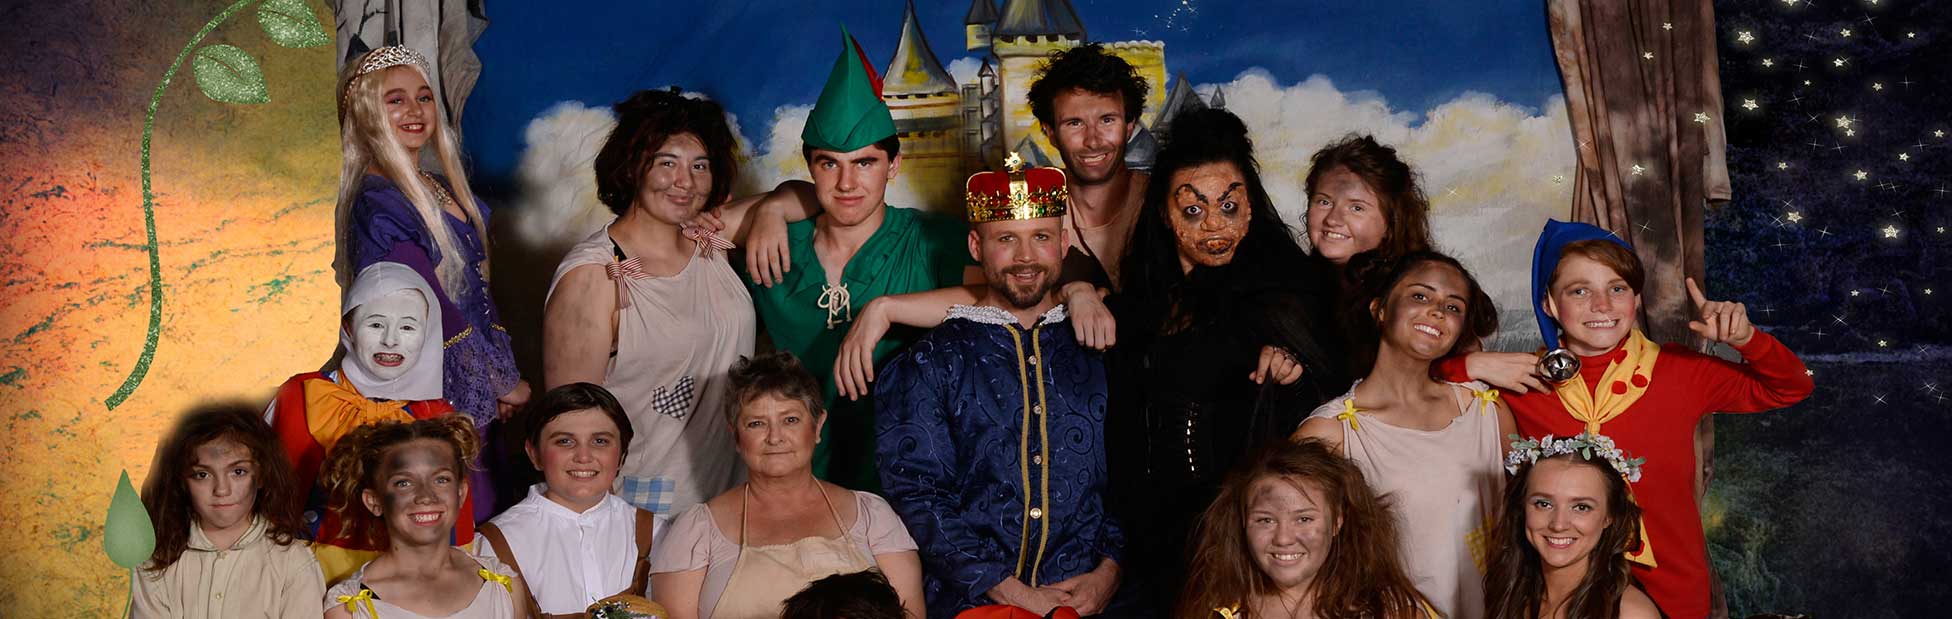 Cast of fairy tale in full dress posing for photo